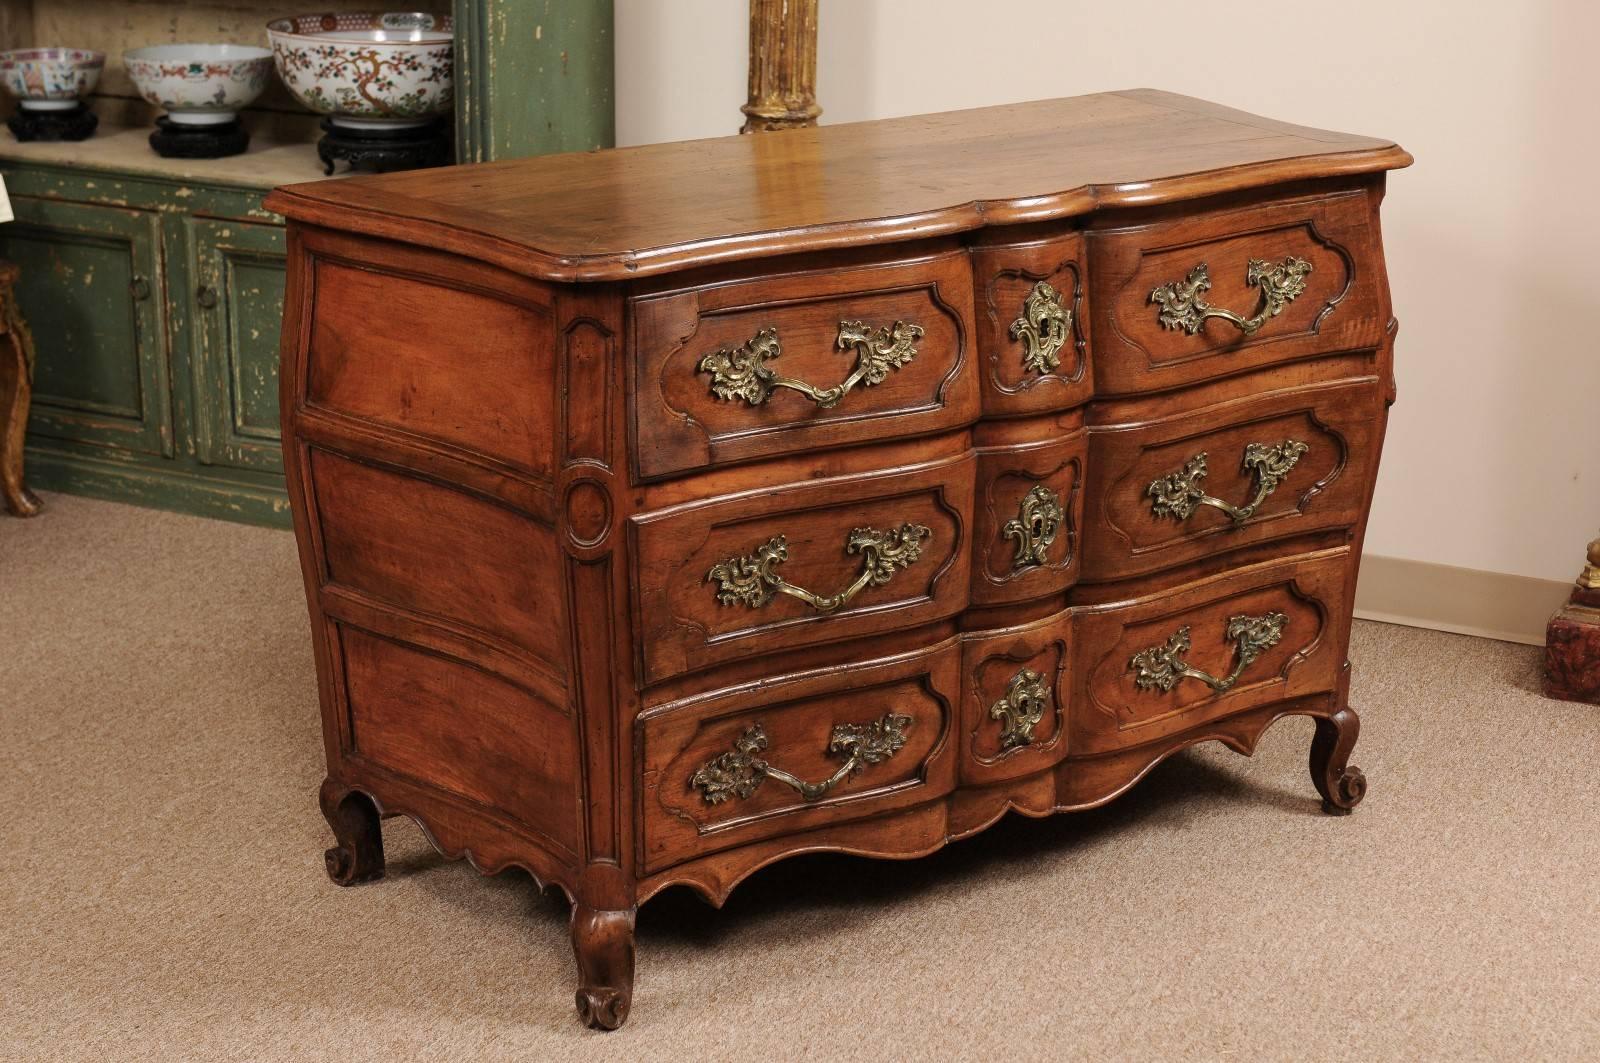 Louis XV period commode in walnut with three-drawers, linen fold front, and scroll feet, France 18th century.